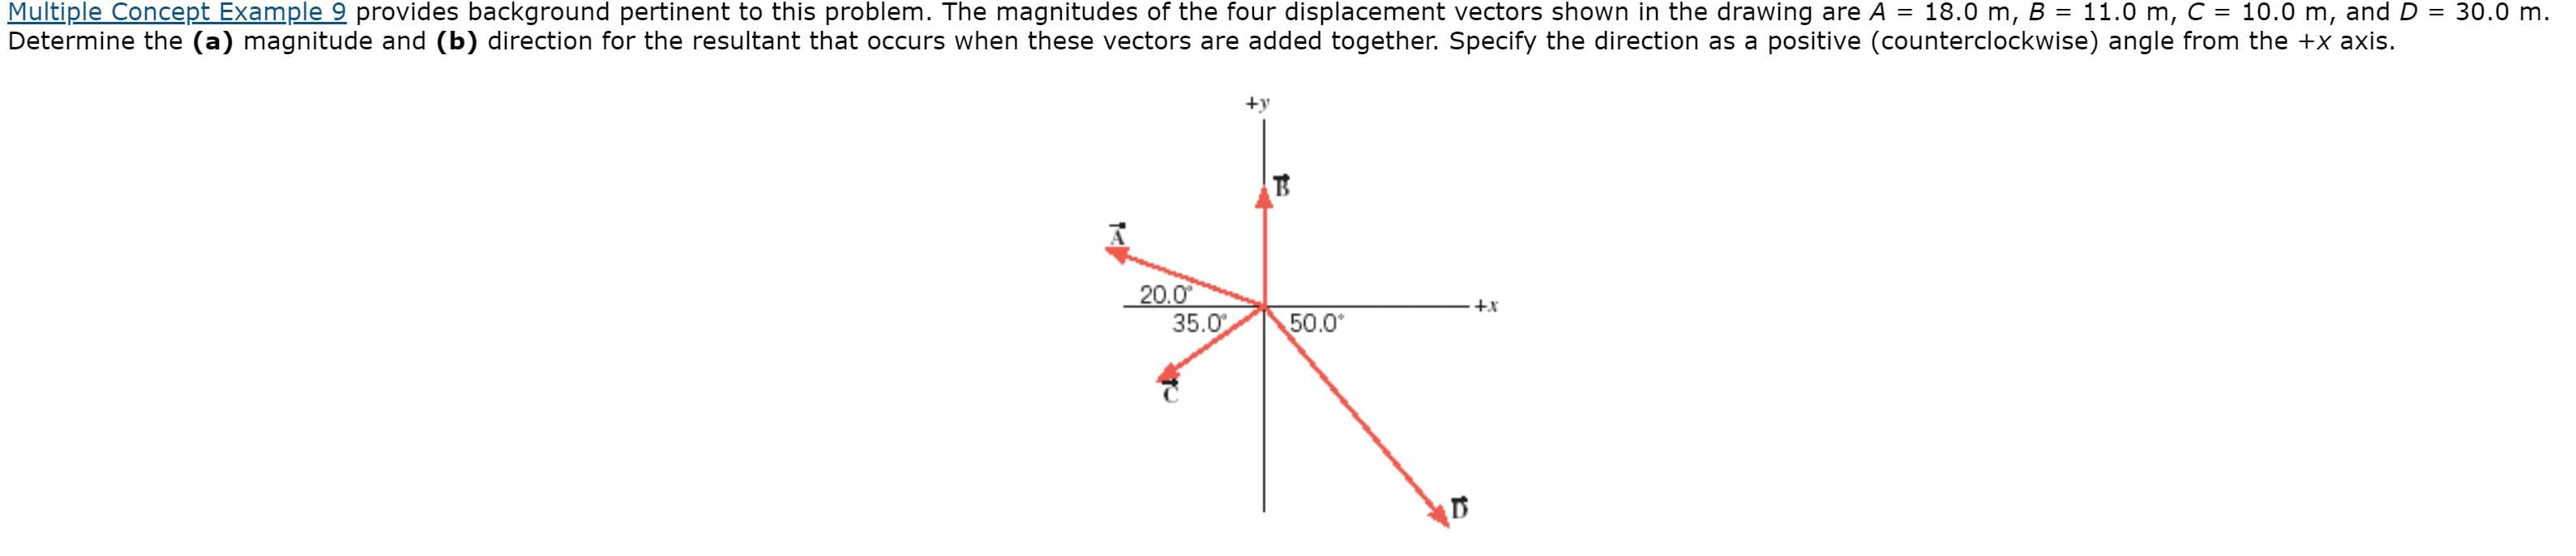 Multiple Concept Example 9 provides background pertinent to this problem. The magnitudes of the four displacement vectors shown in the drawing are A =
10.0 m, and
D = 30.0 m.
18.0 m, B = 11.0 m, C
%3D
Determine the (a) magnitude and (b) direction for the resultant that occurs when these vectors are added together. Specify the direction as a positive (counterclockwise) angle from the +x axis.
+y
20.0
35.0
+x
50.0
